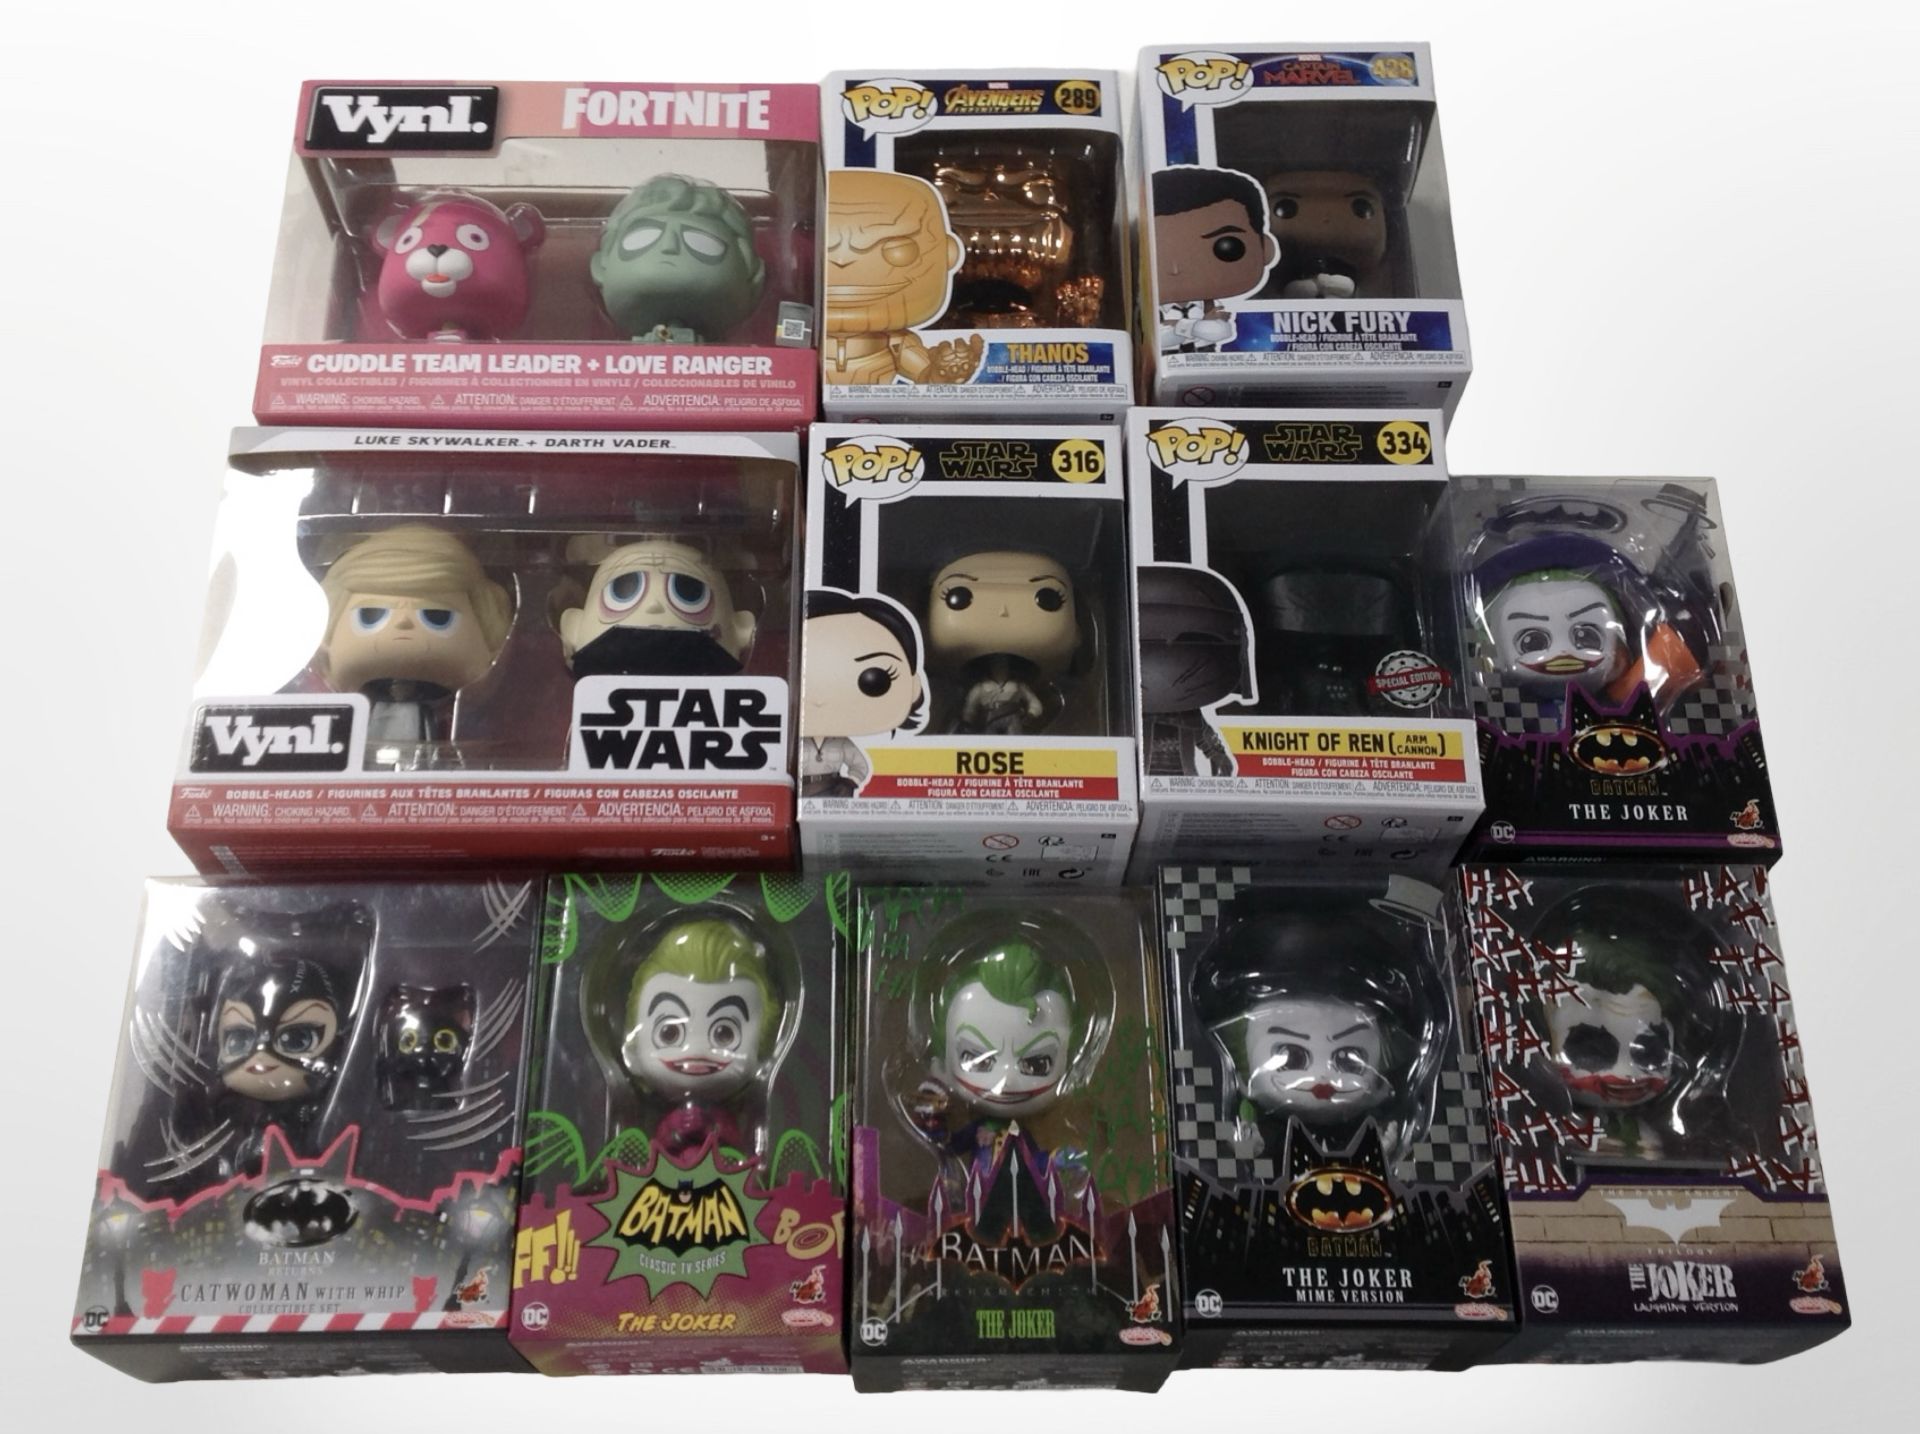 12 Funko and Hot Toys figurines including Marvel, Star Wars, Fortnite, etc., boxed.